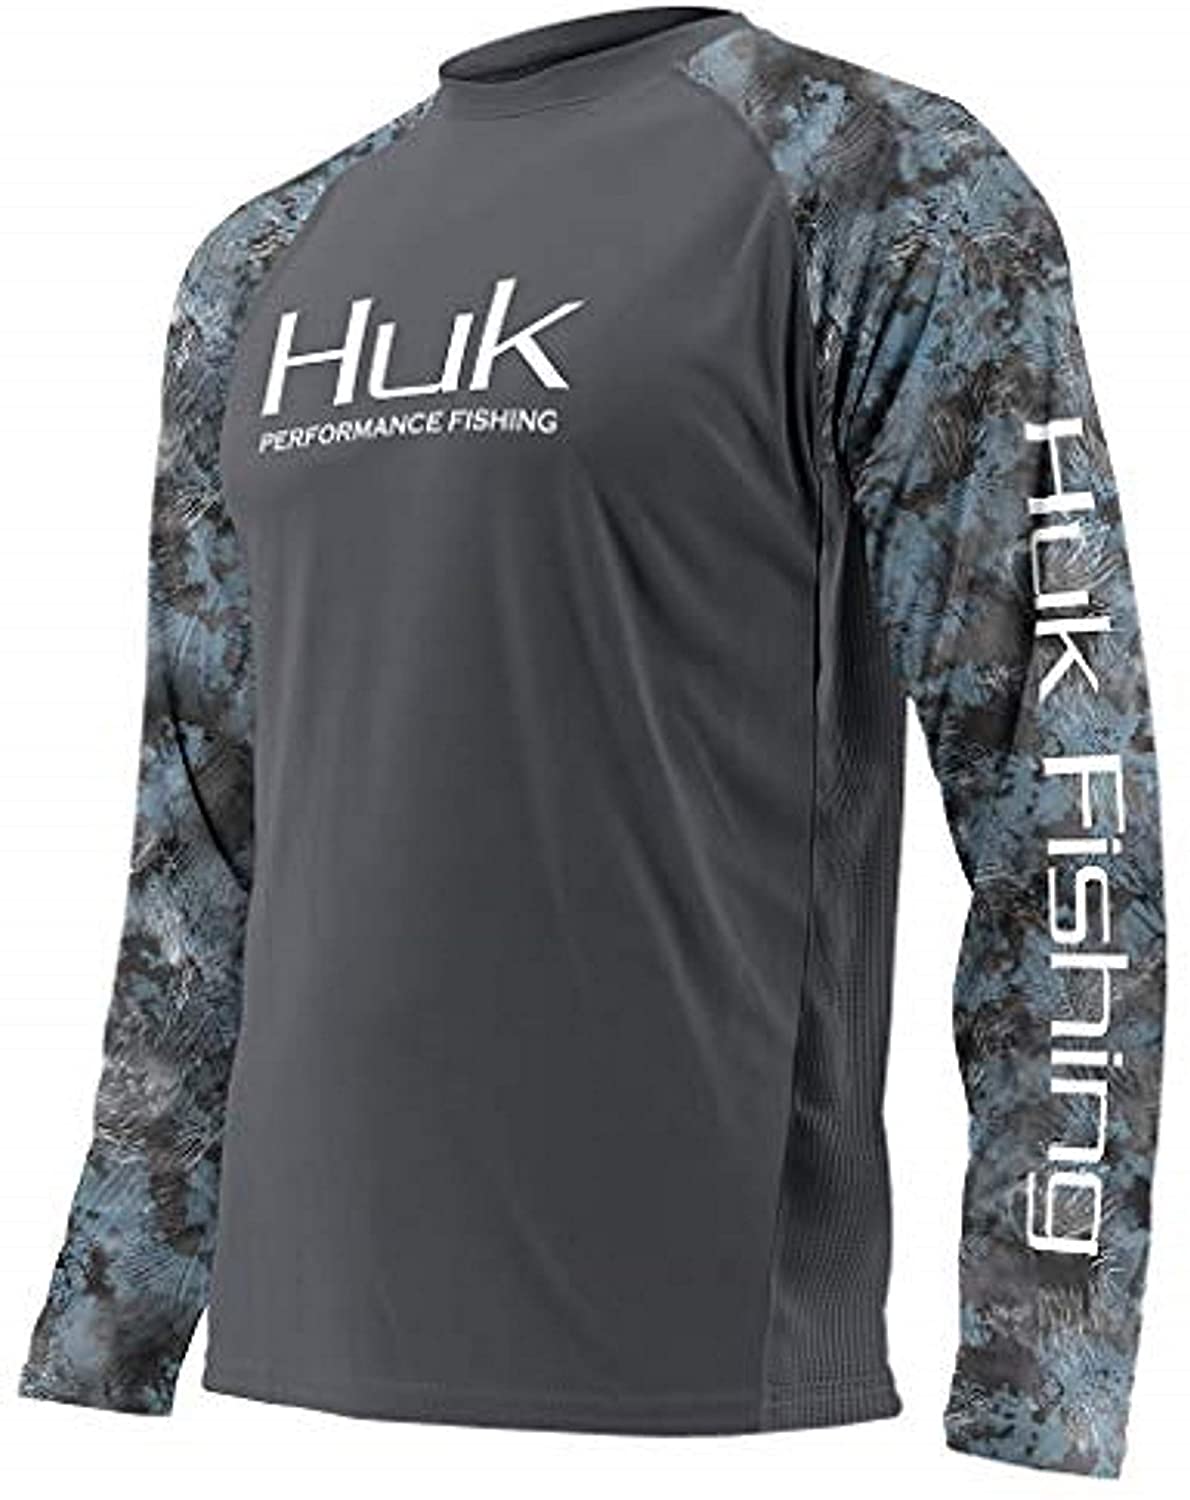 Save 35% HUK DOUBLE HEADER Youth LS Performance Fishing Shirt-Pick Color/Size 